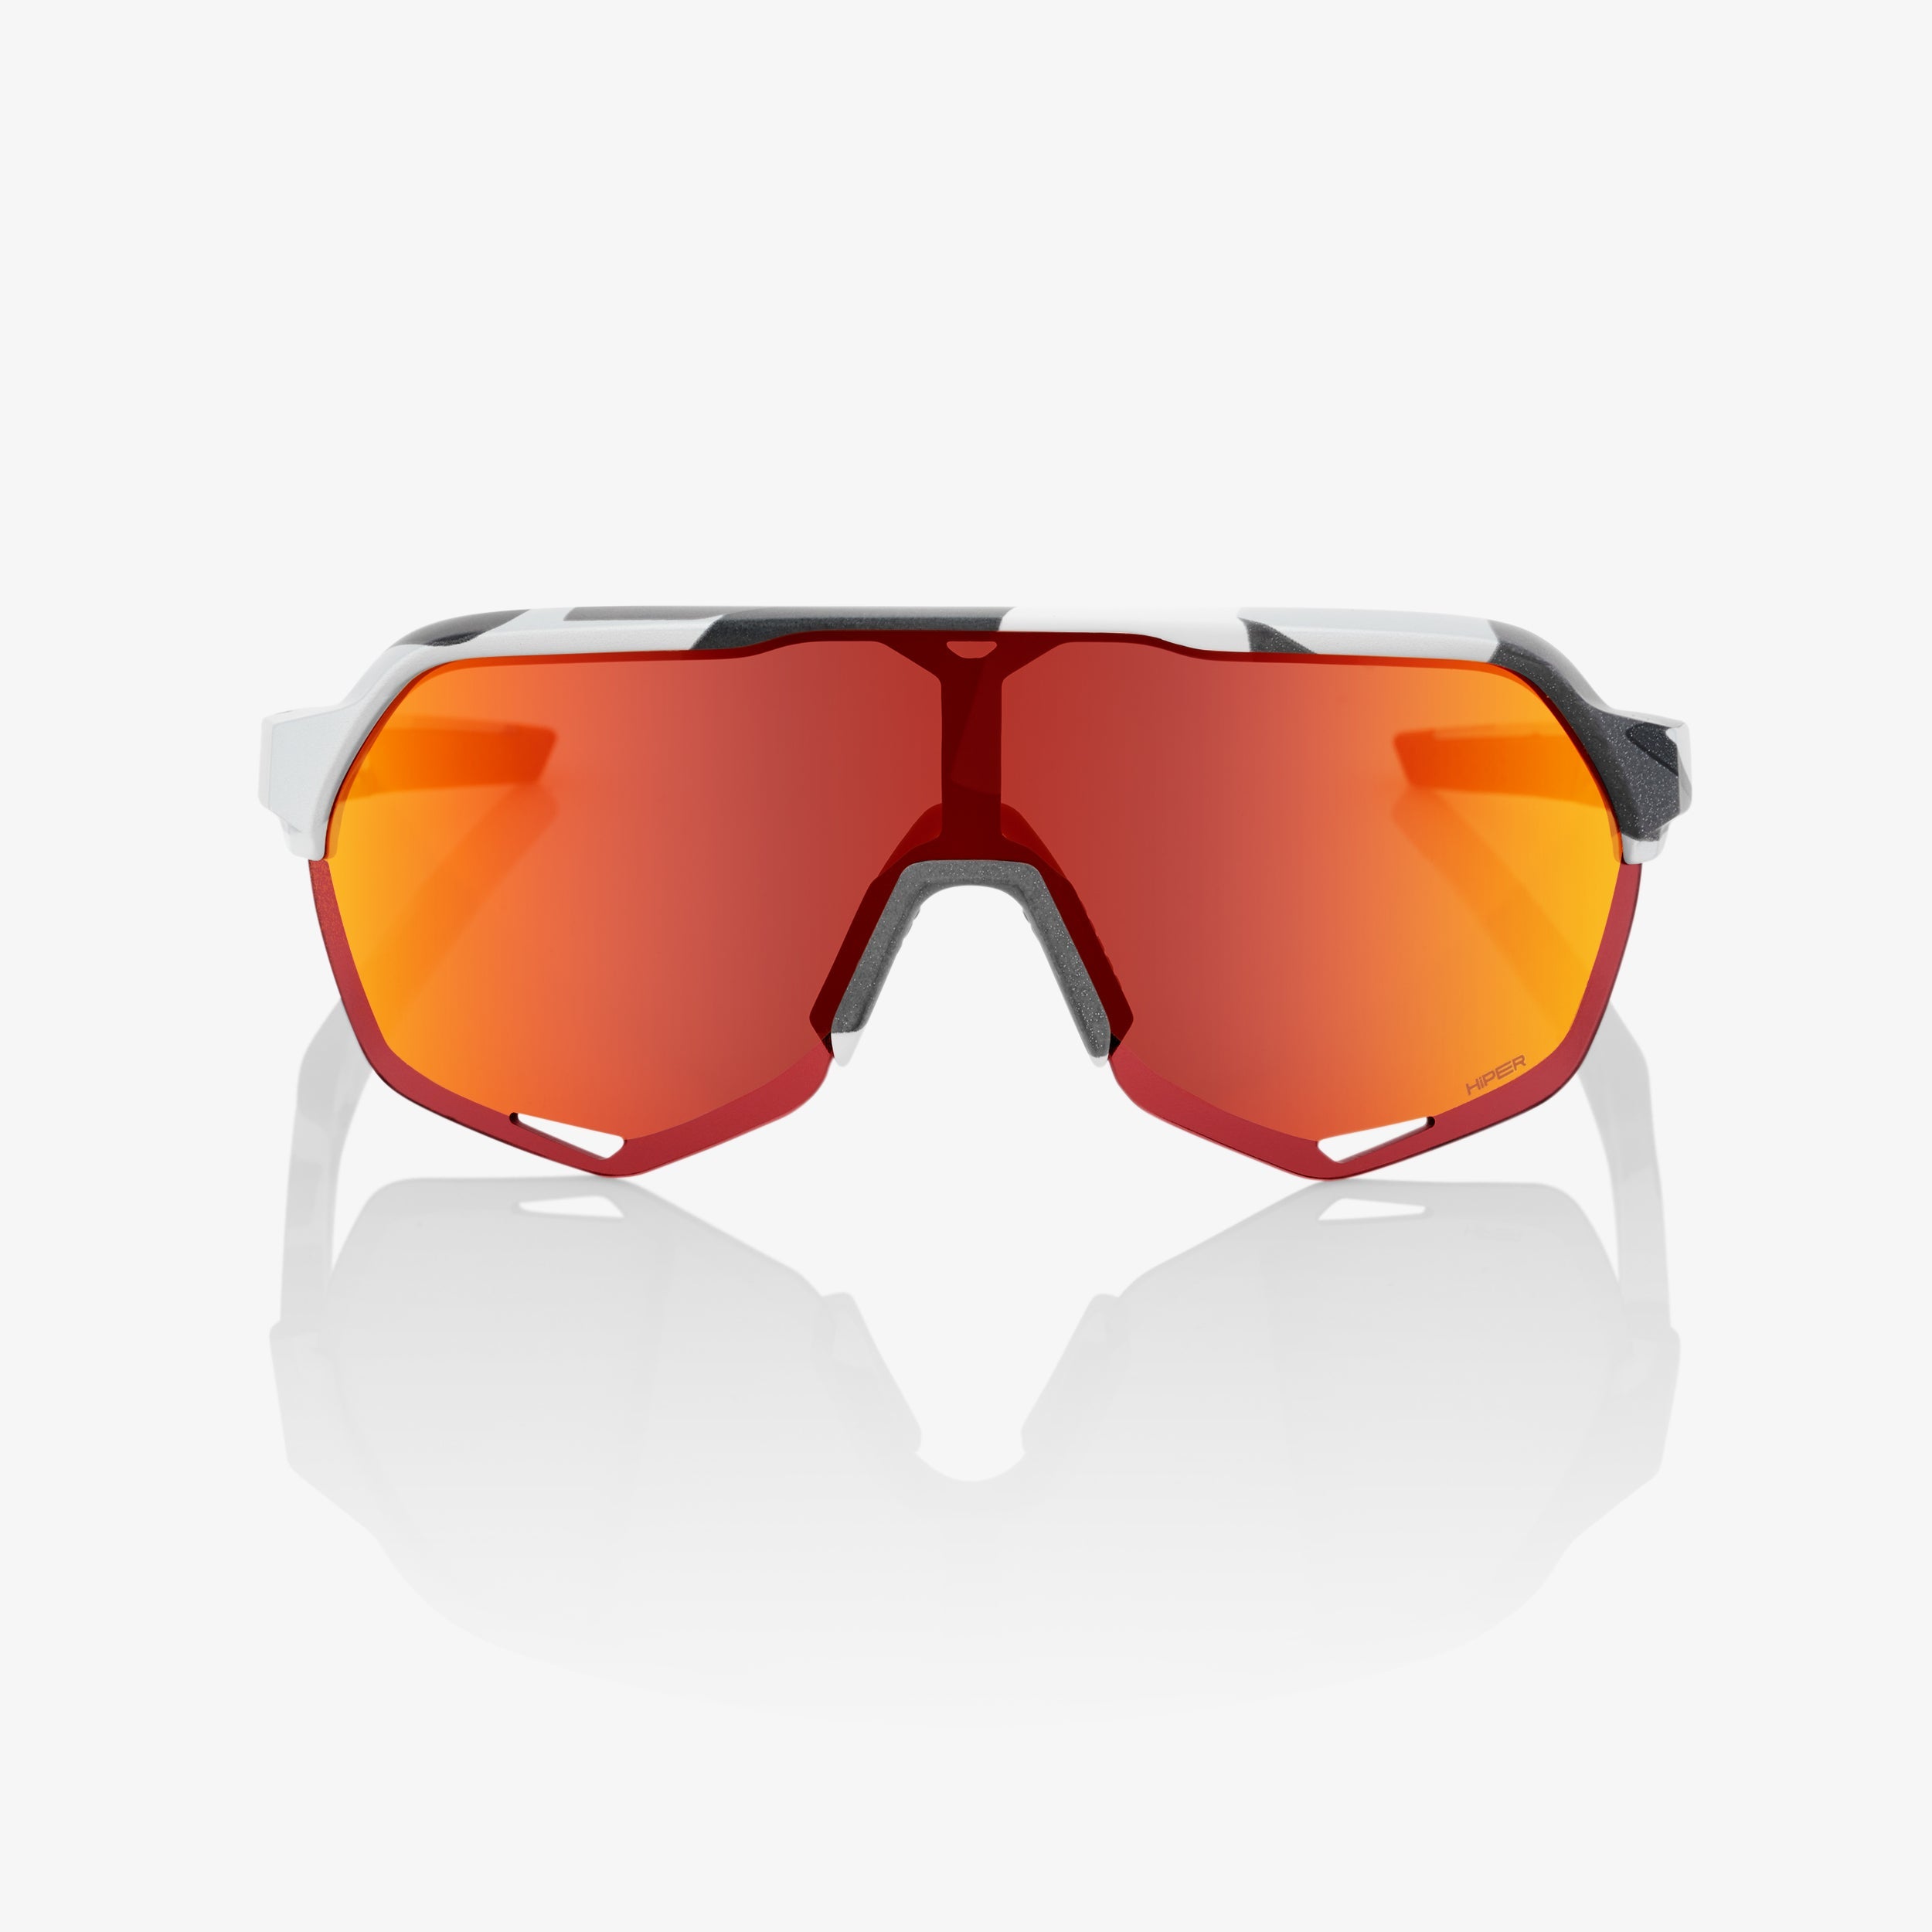 S2® - Soft Tact Grey Camo - HiPER® Red Multilayer Mirror Lens - Secondary